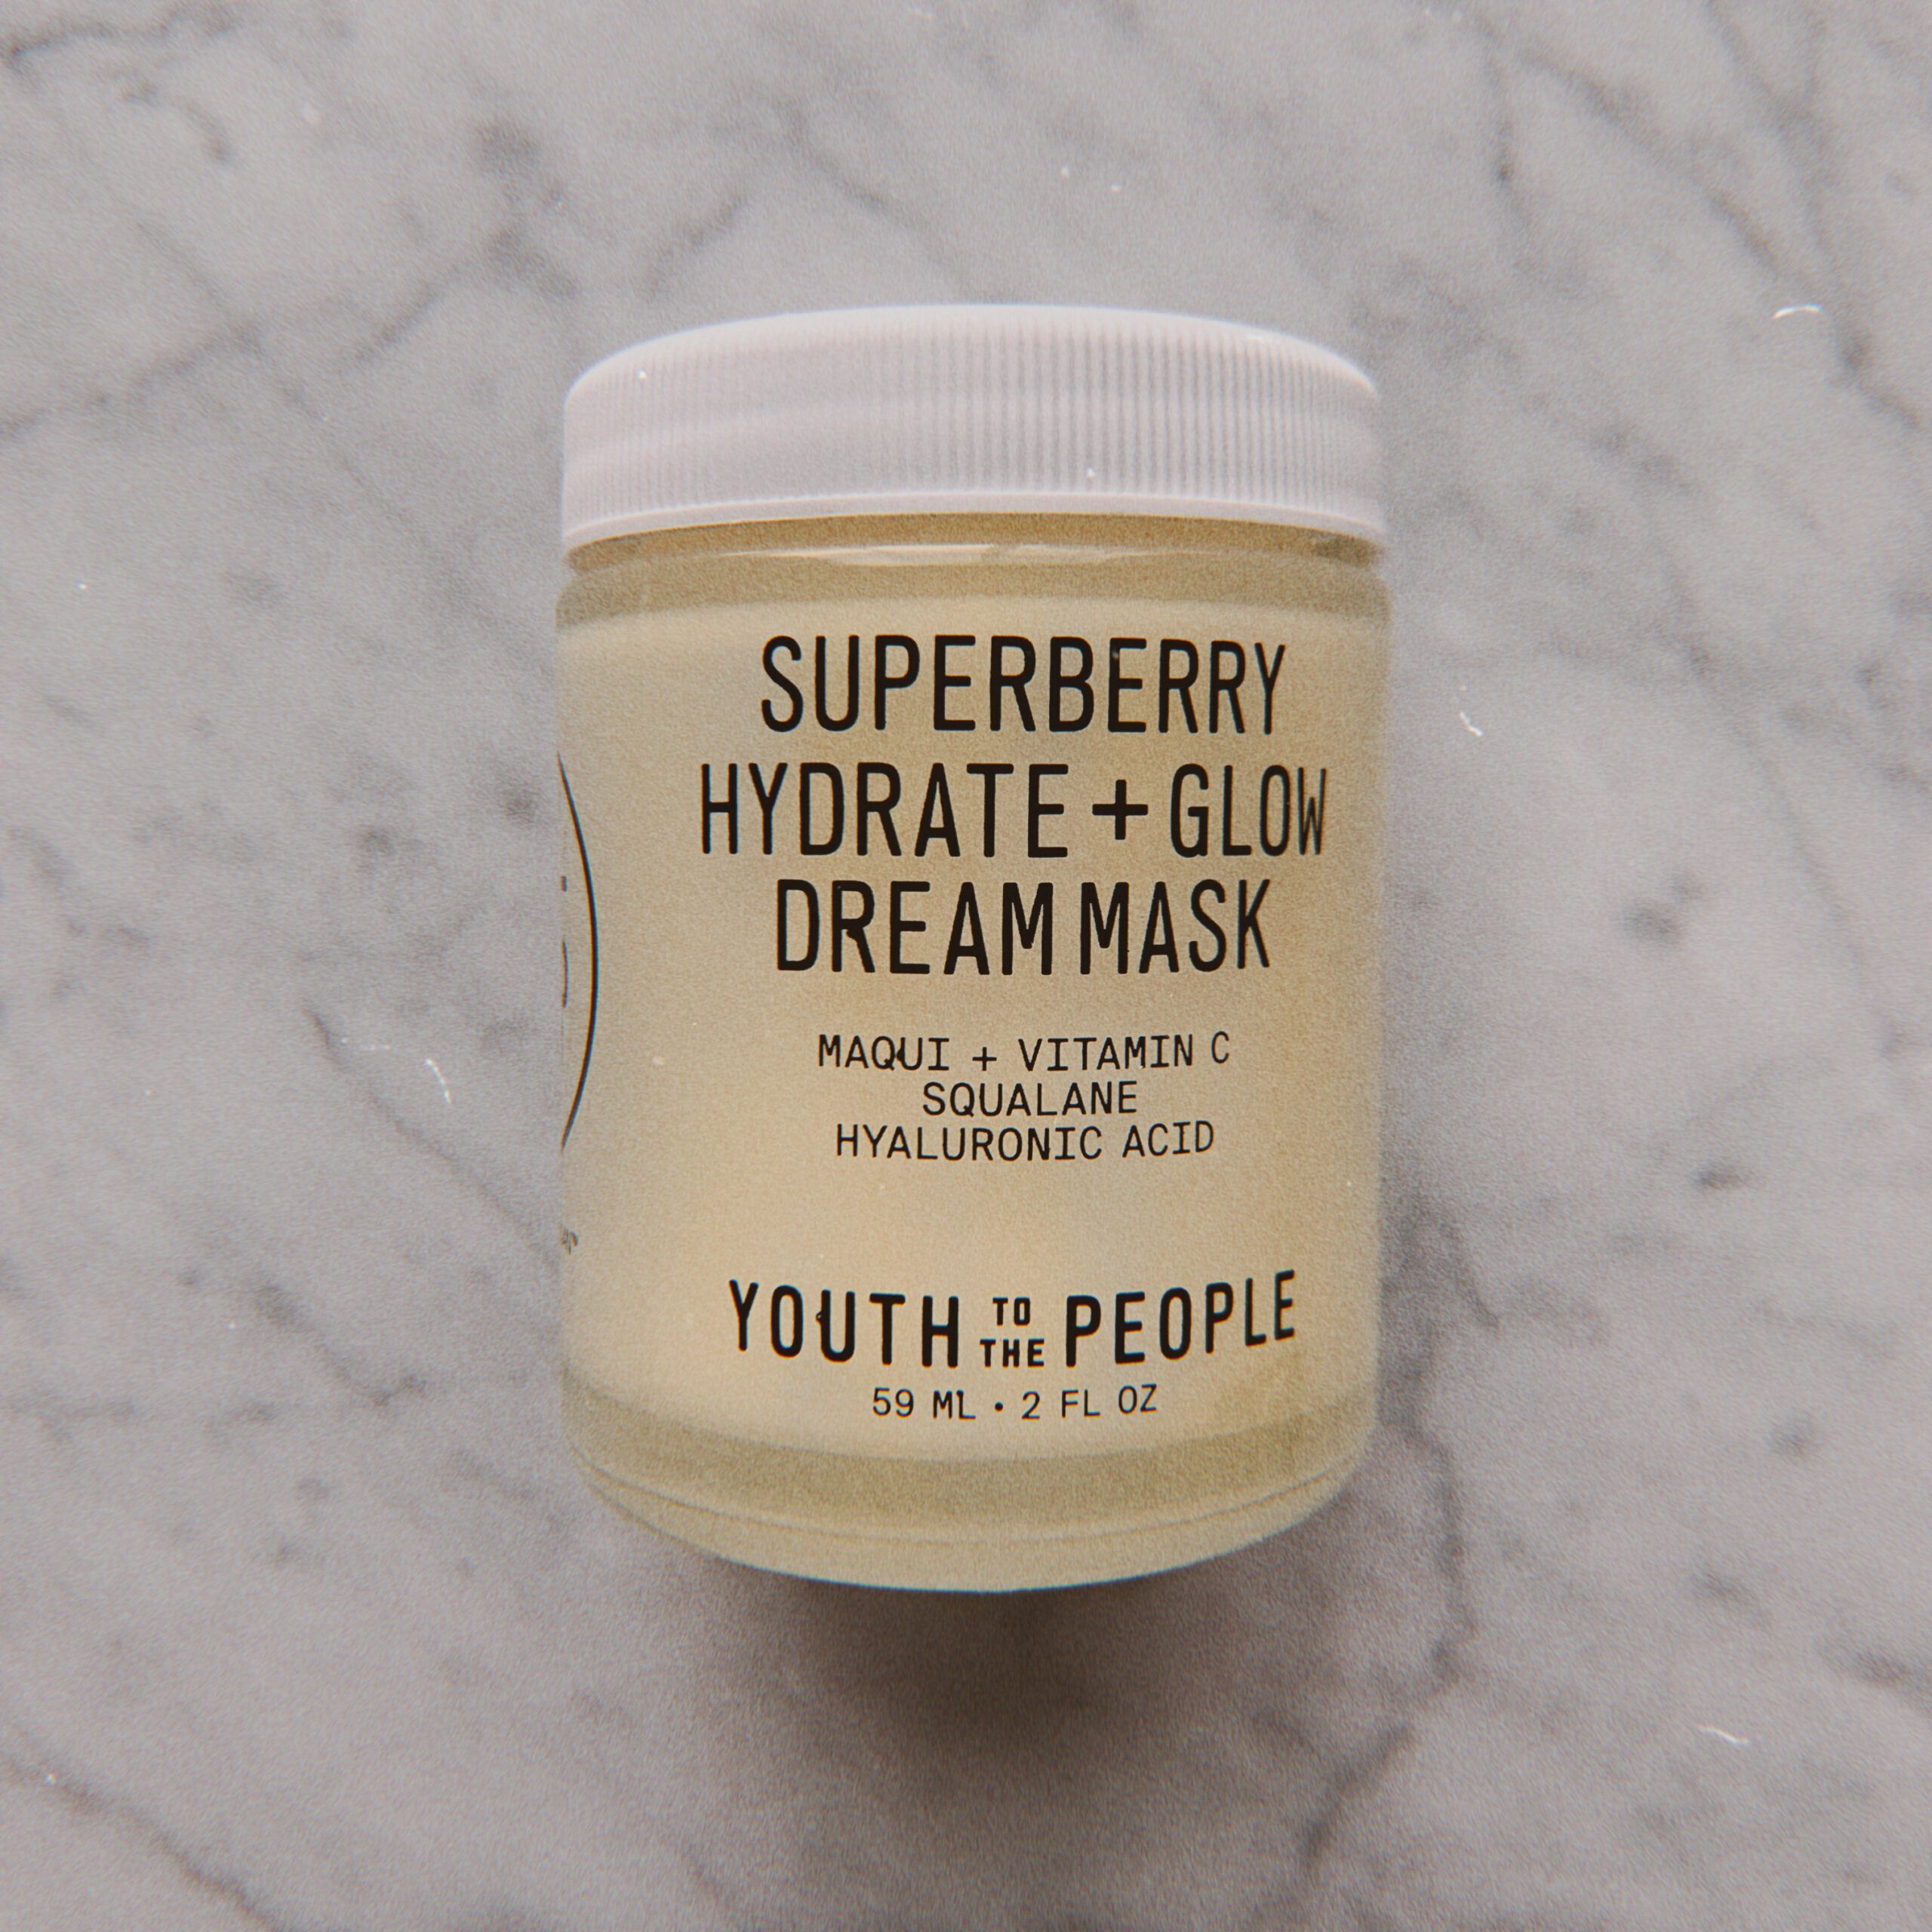 Review: Youth To The People Superberry Hydrate + Glow Dream Mask